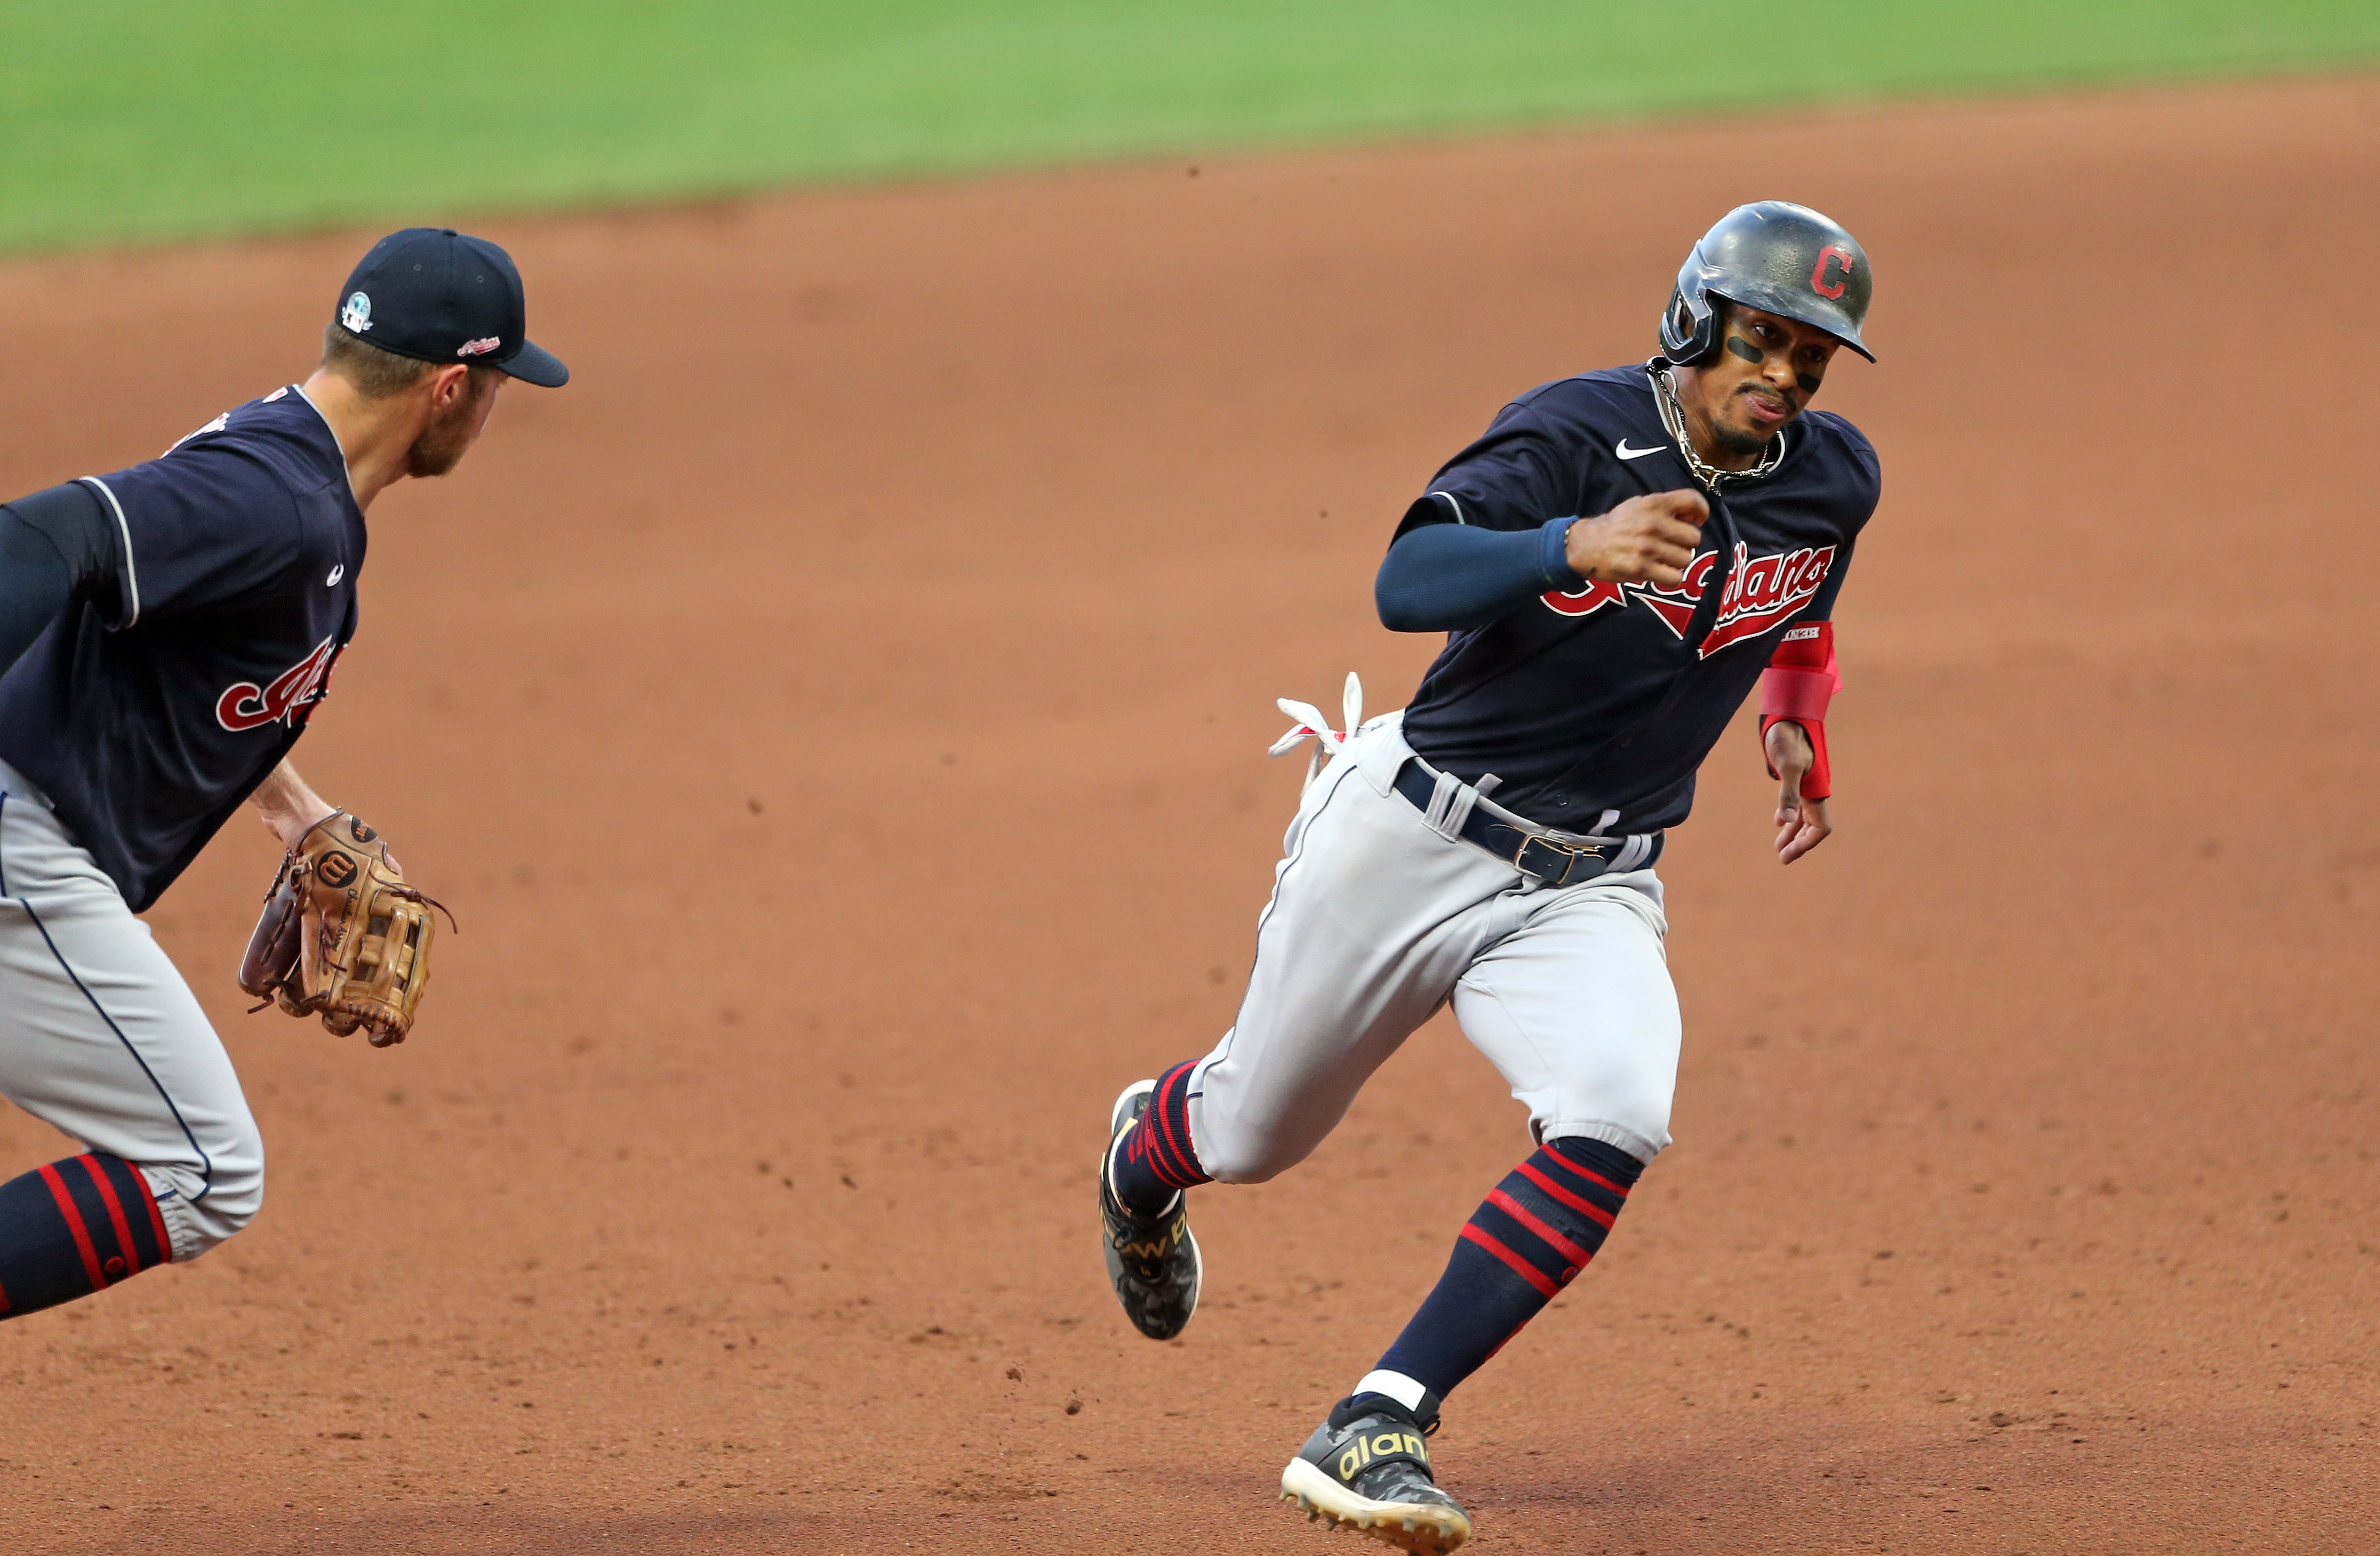 Indians team president seems to be pushing Francisco Lindor out the door